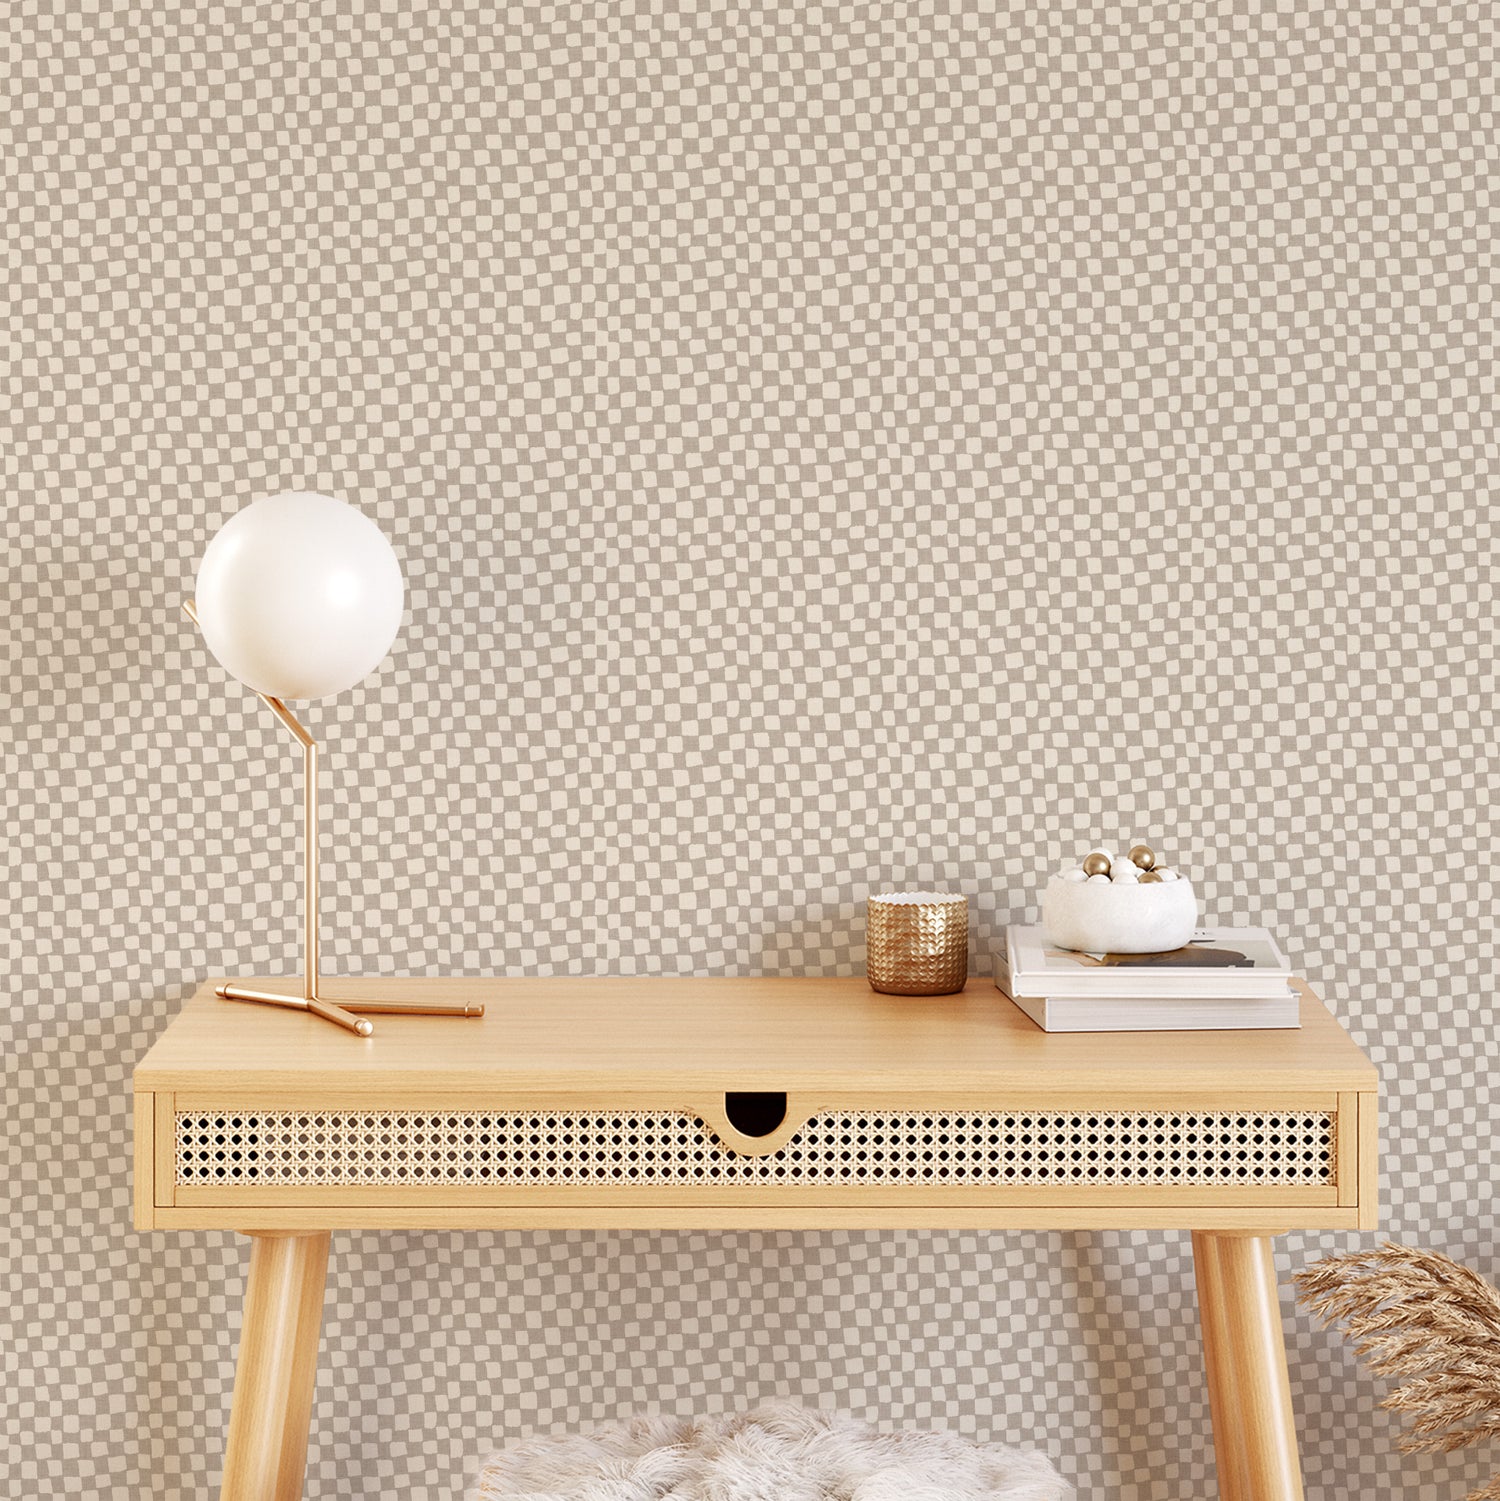 Transform your space with Lazy Checkers Wallpaper – Dove Gray. Featuring playful, uneven visuals for a dynamic, three-dimensional look, this wallpaper can bring a sense of movement and energy to any room.